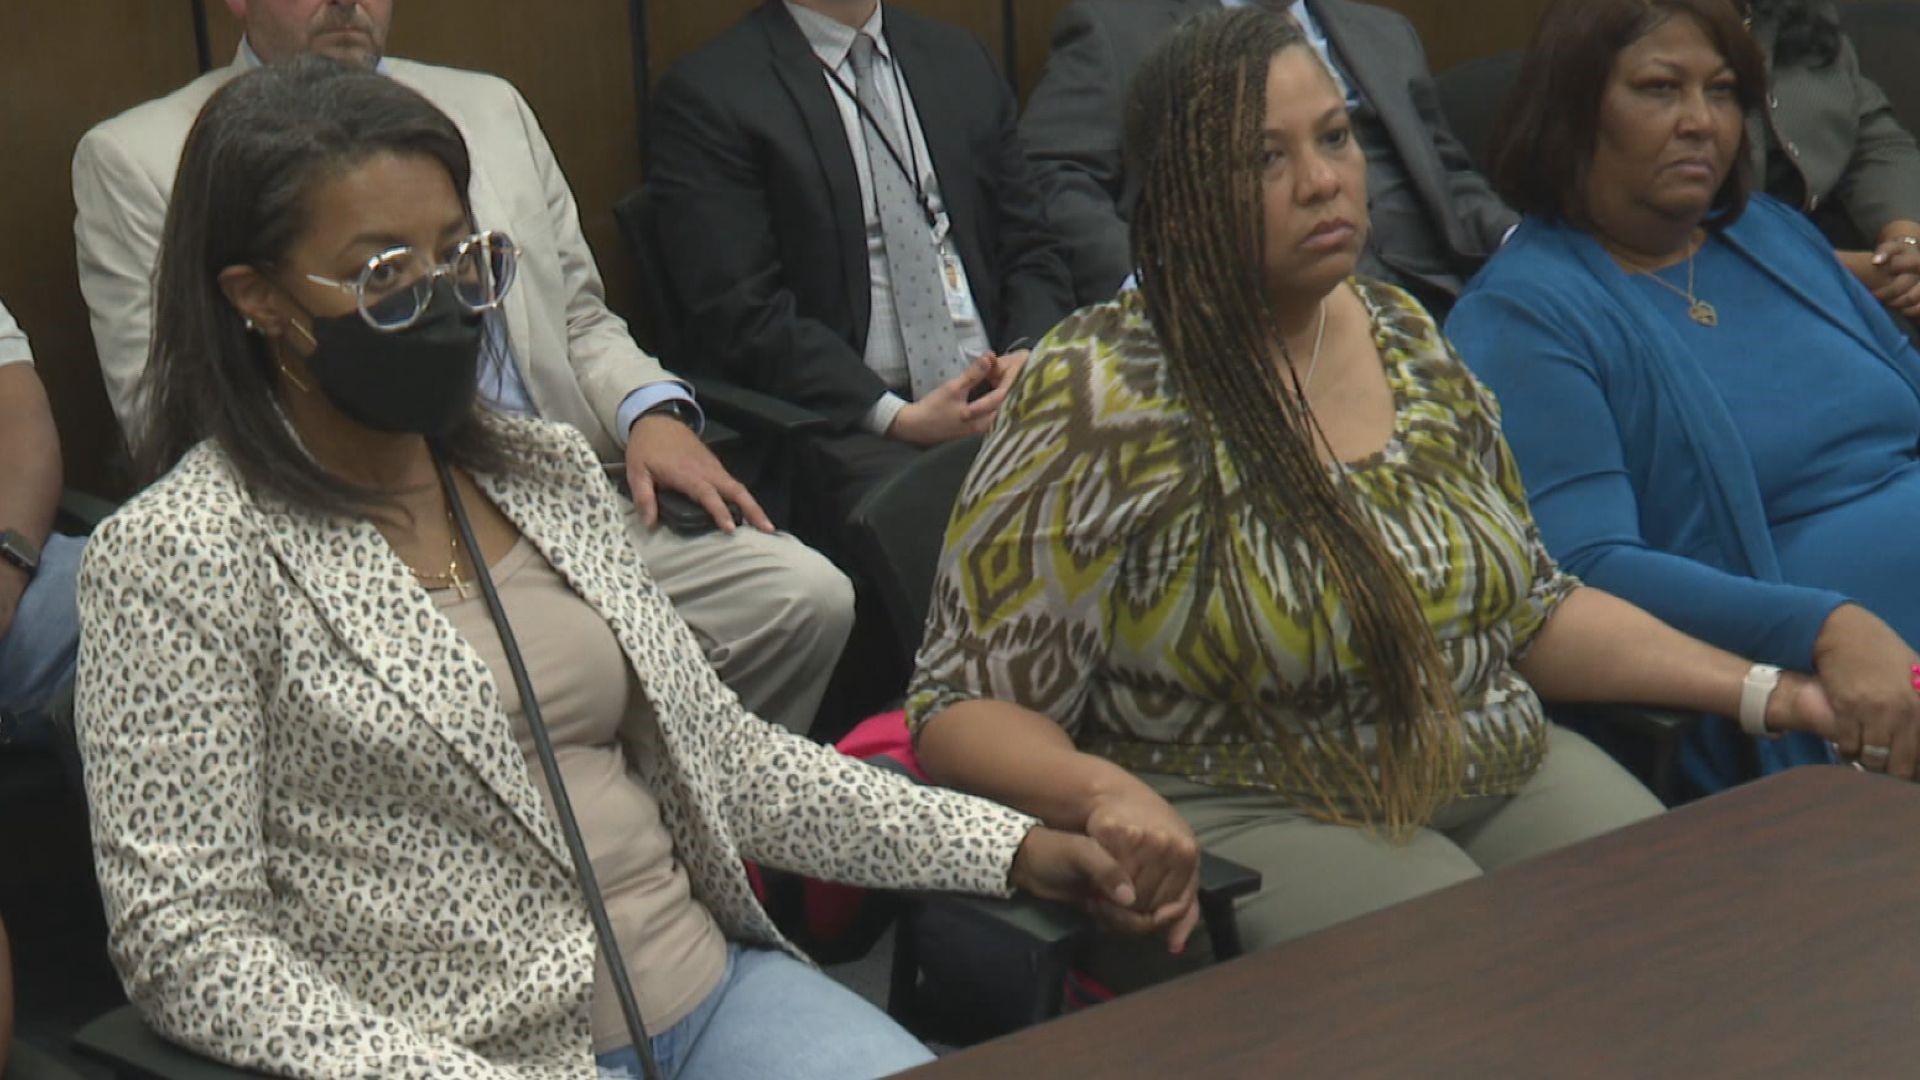 The exoneration hearing wrapped up Thursday after a week and a half of testimony.